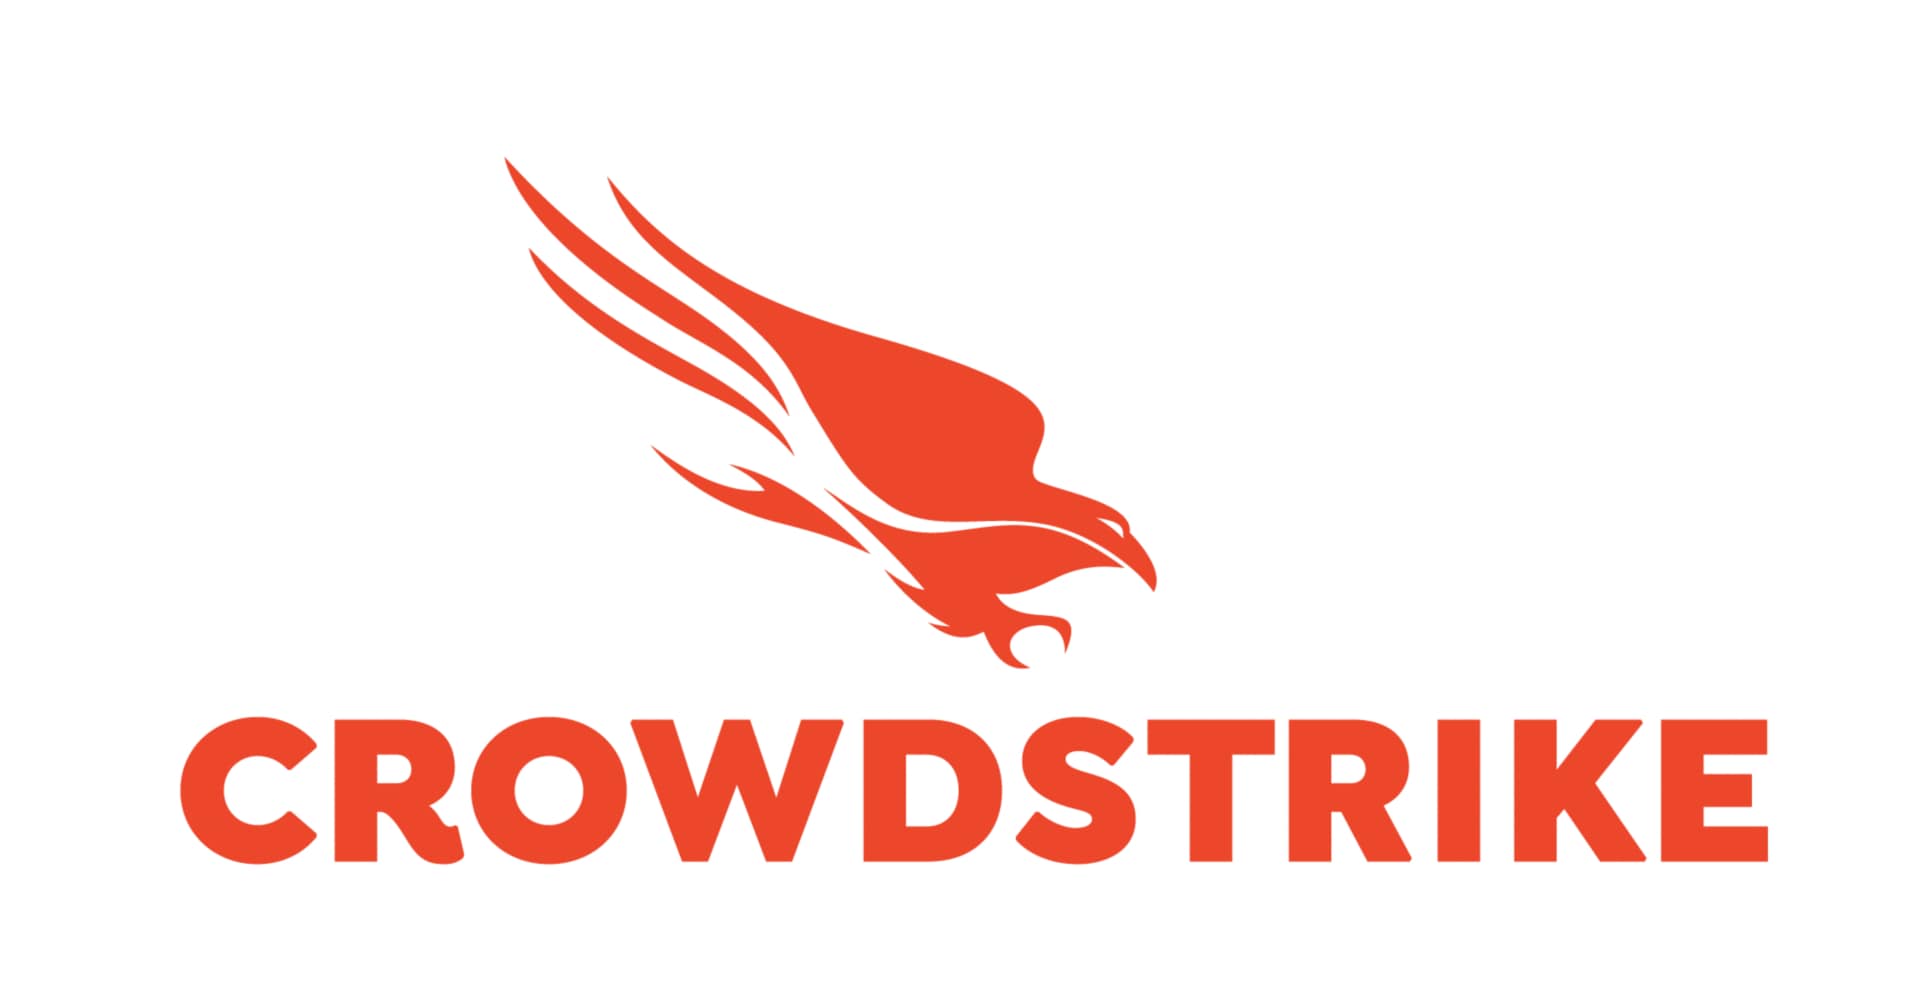 CrowdStrike 36-Month Falcon for Mobile Standard